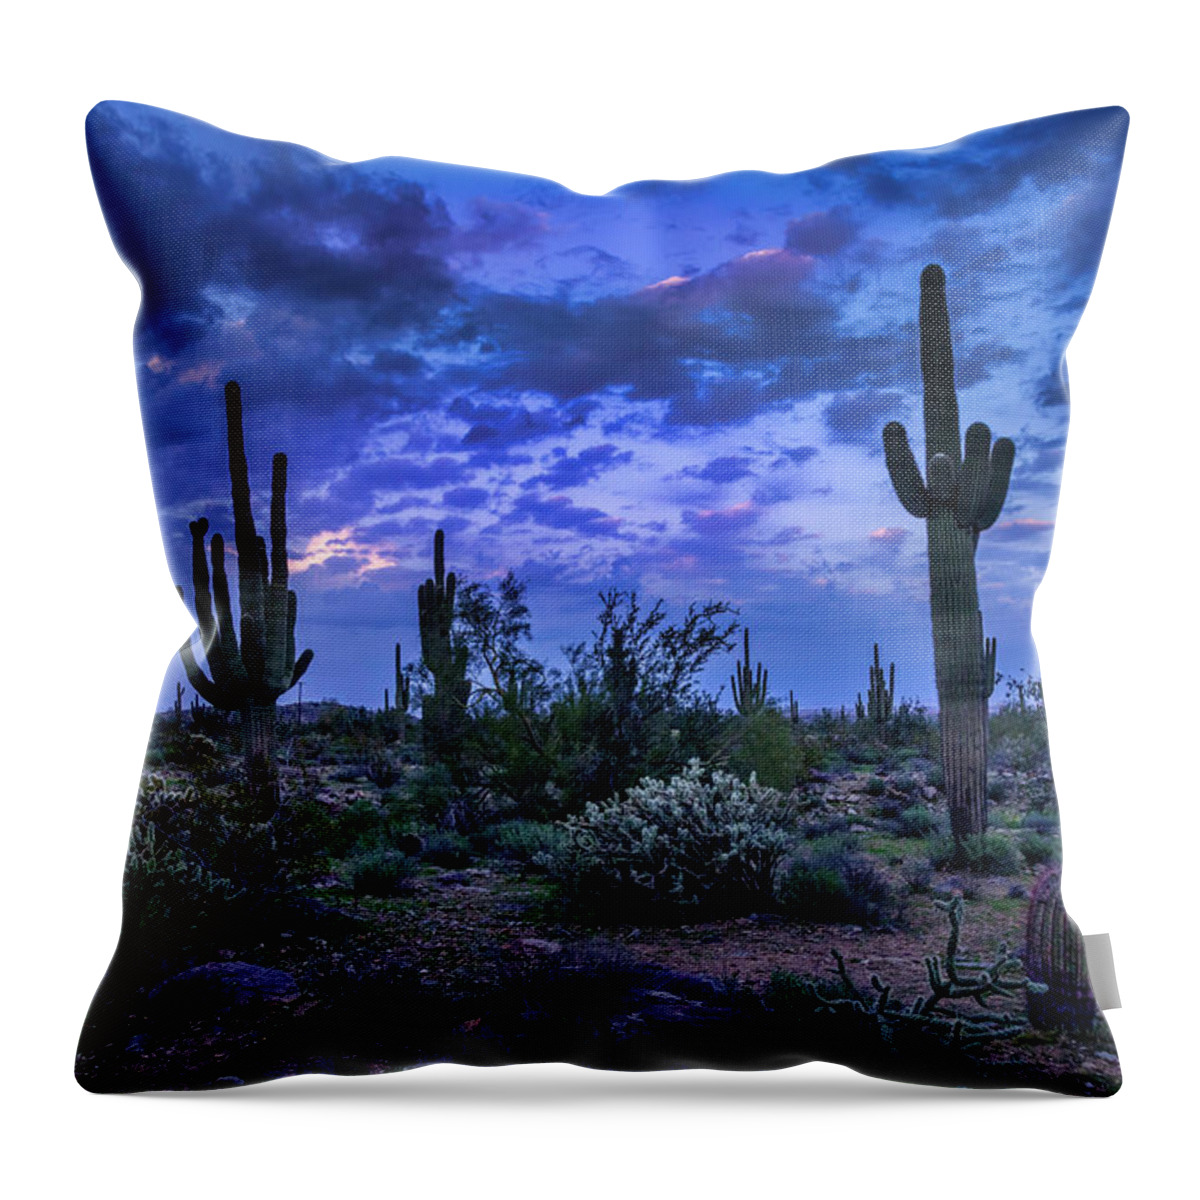 Blue Hour Throw Pillow featuring the photograph Blue Hour In The Desert by Lorraine Baum